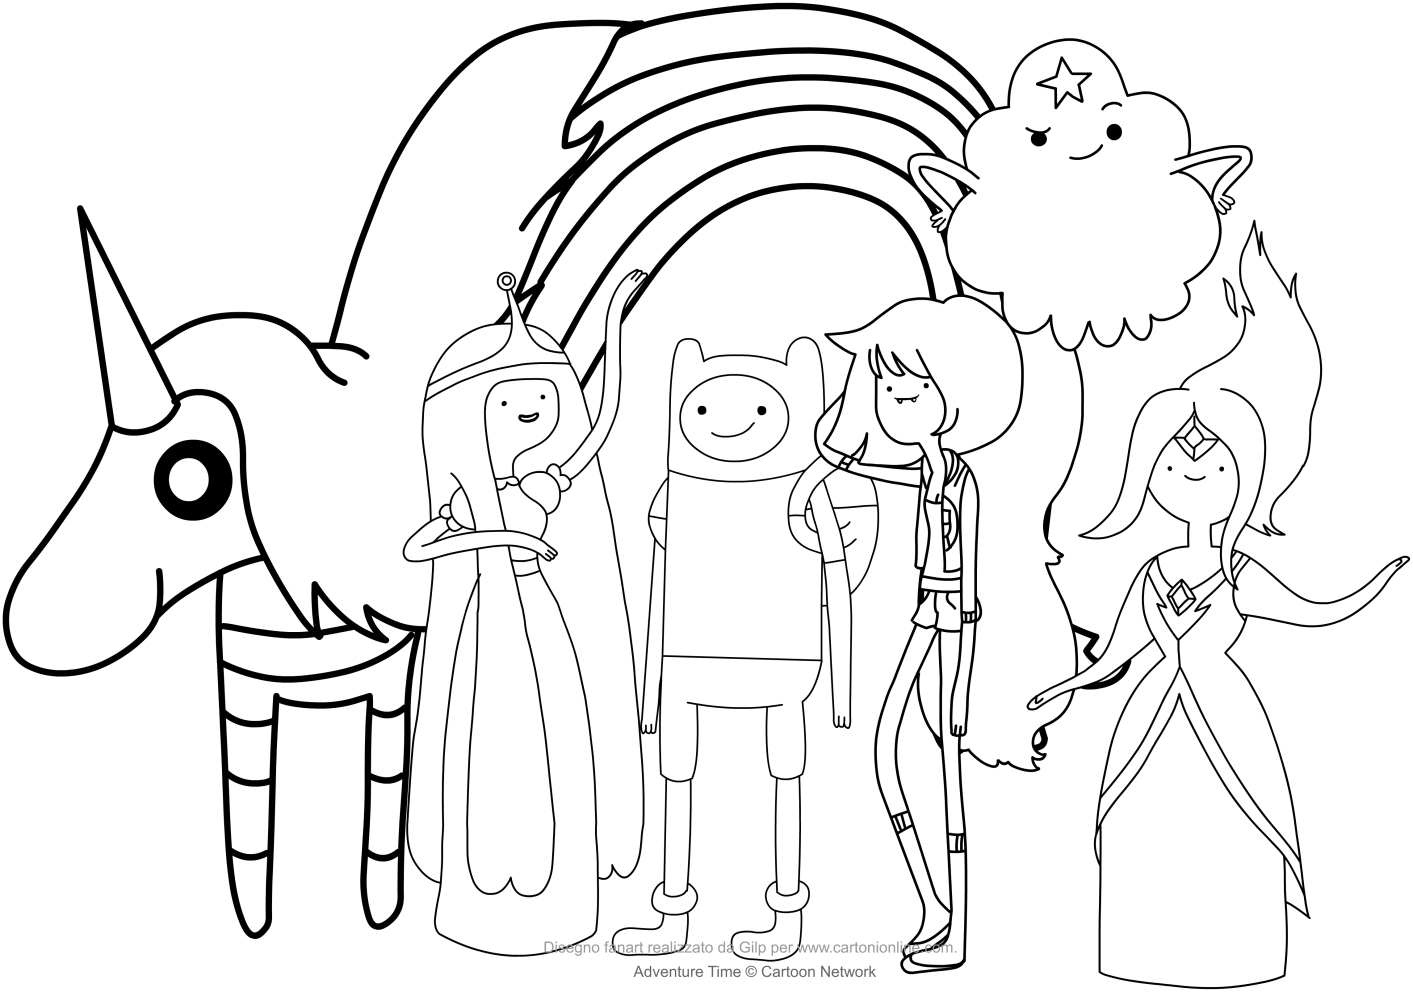  Finn and the princesses (Adventure Time) coloring page to print